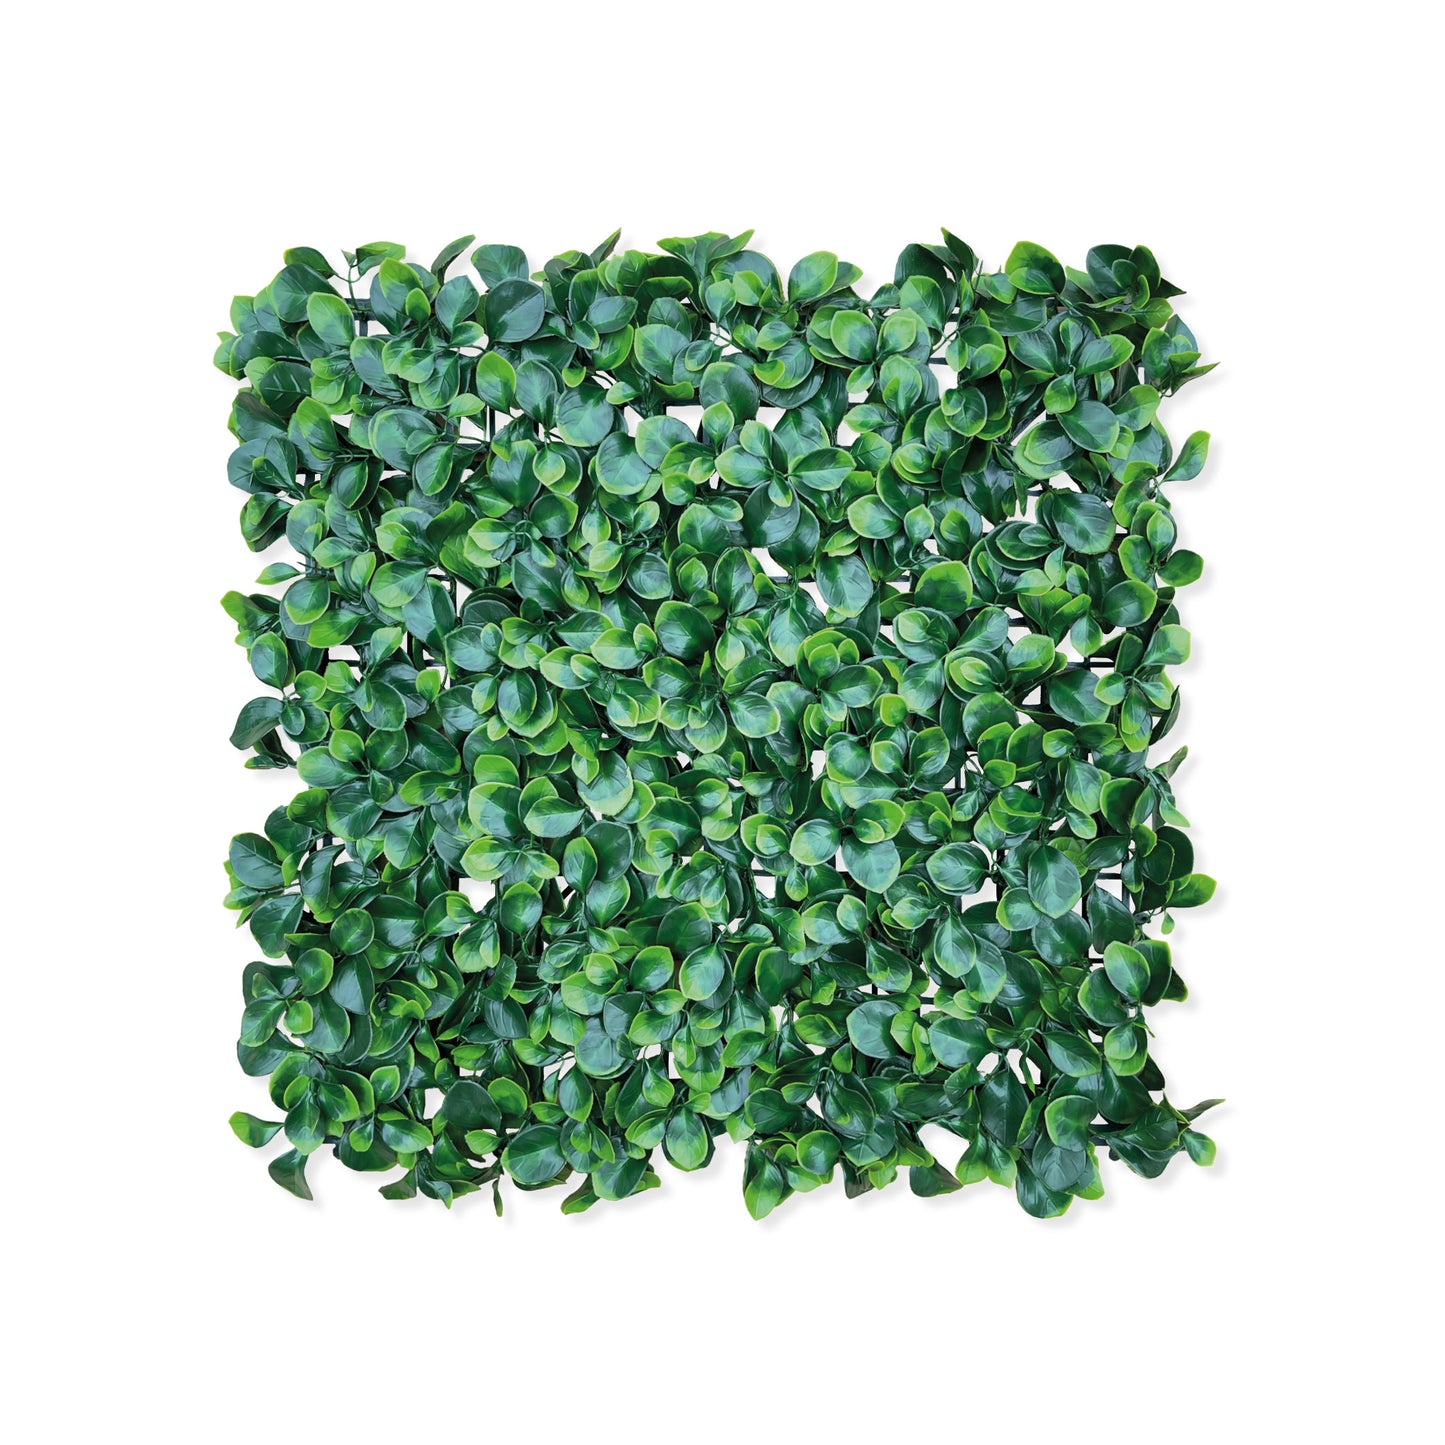 Plant panel "GREEN PIECE" made of Realtouch artificial plants